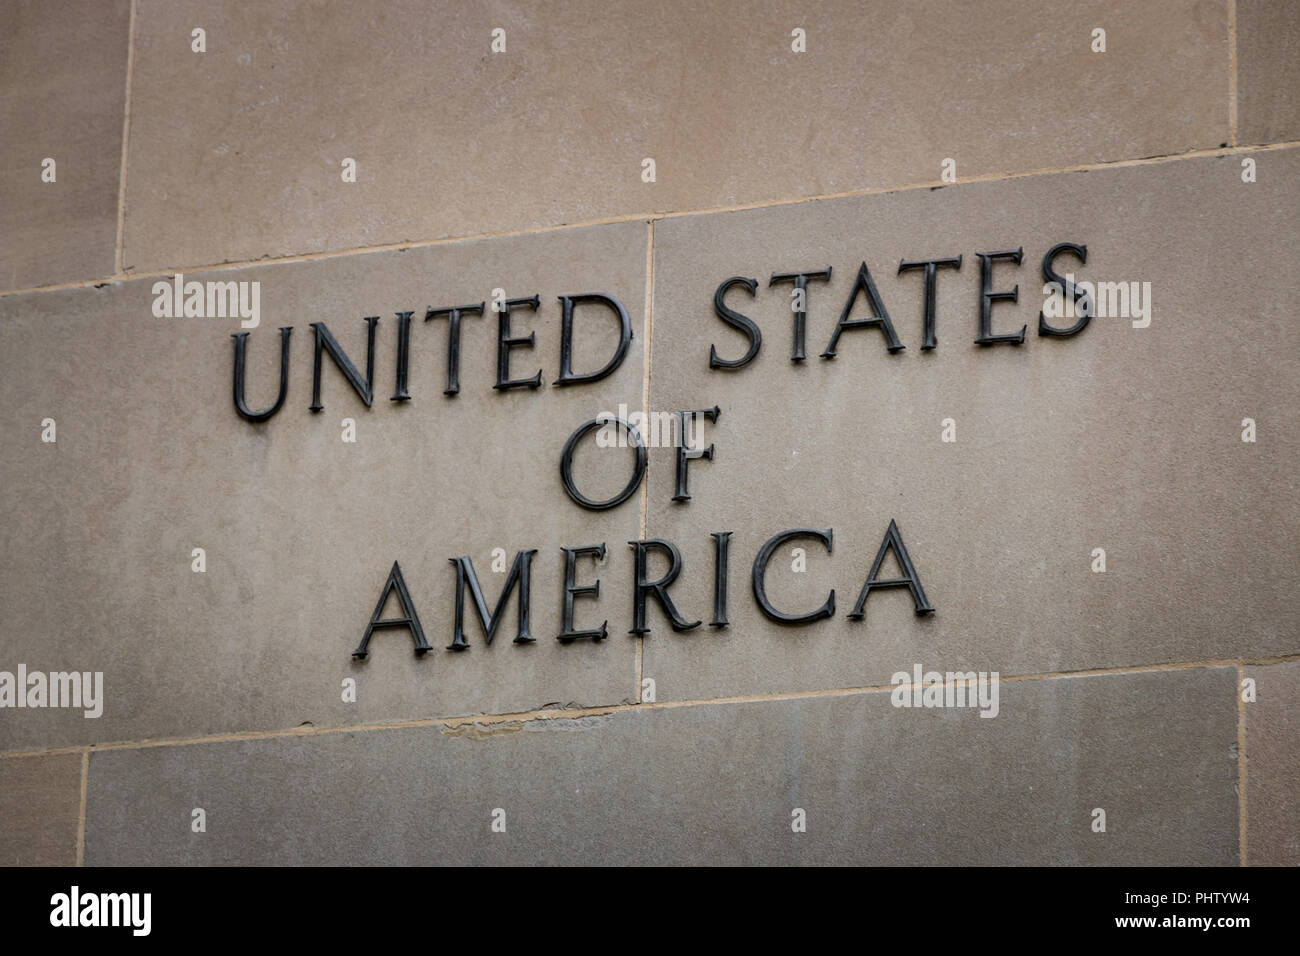 'United States of America' sign Stock Photo